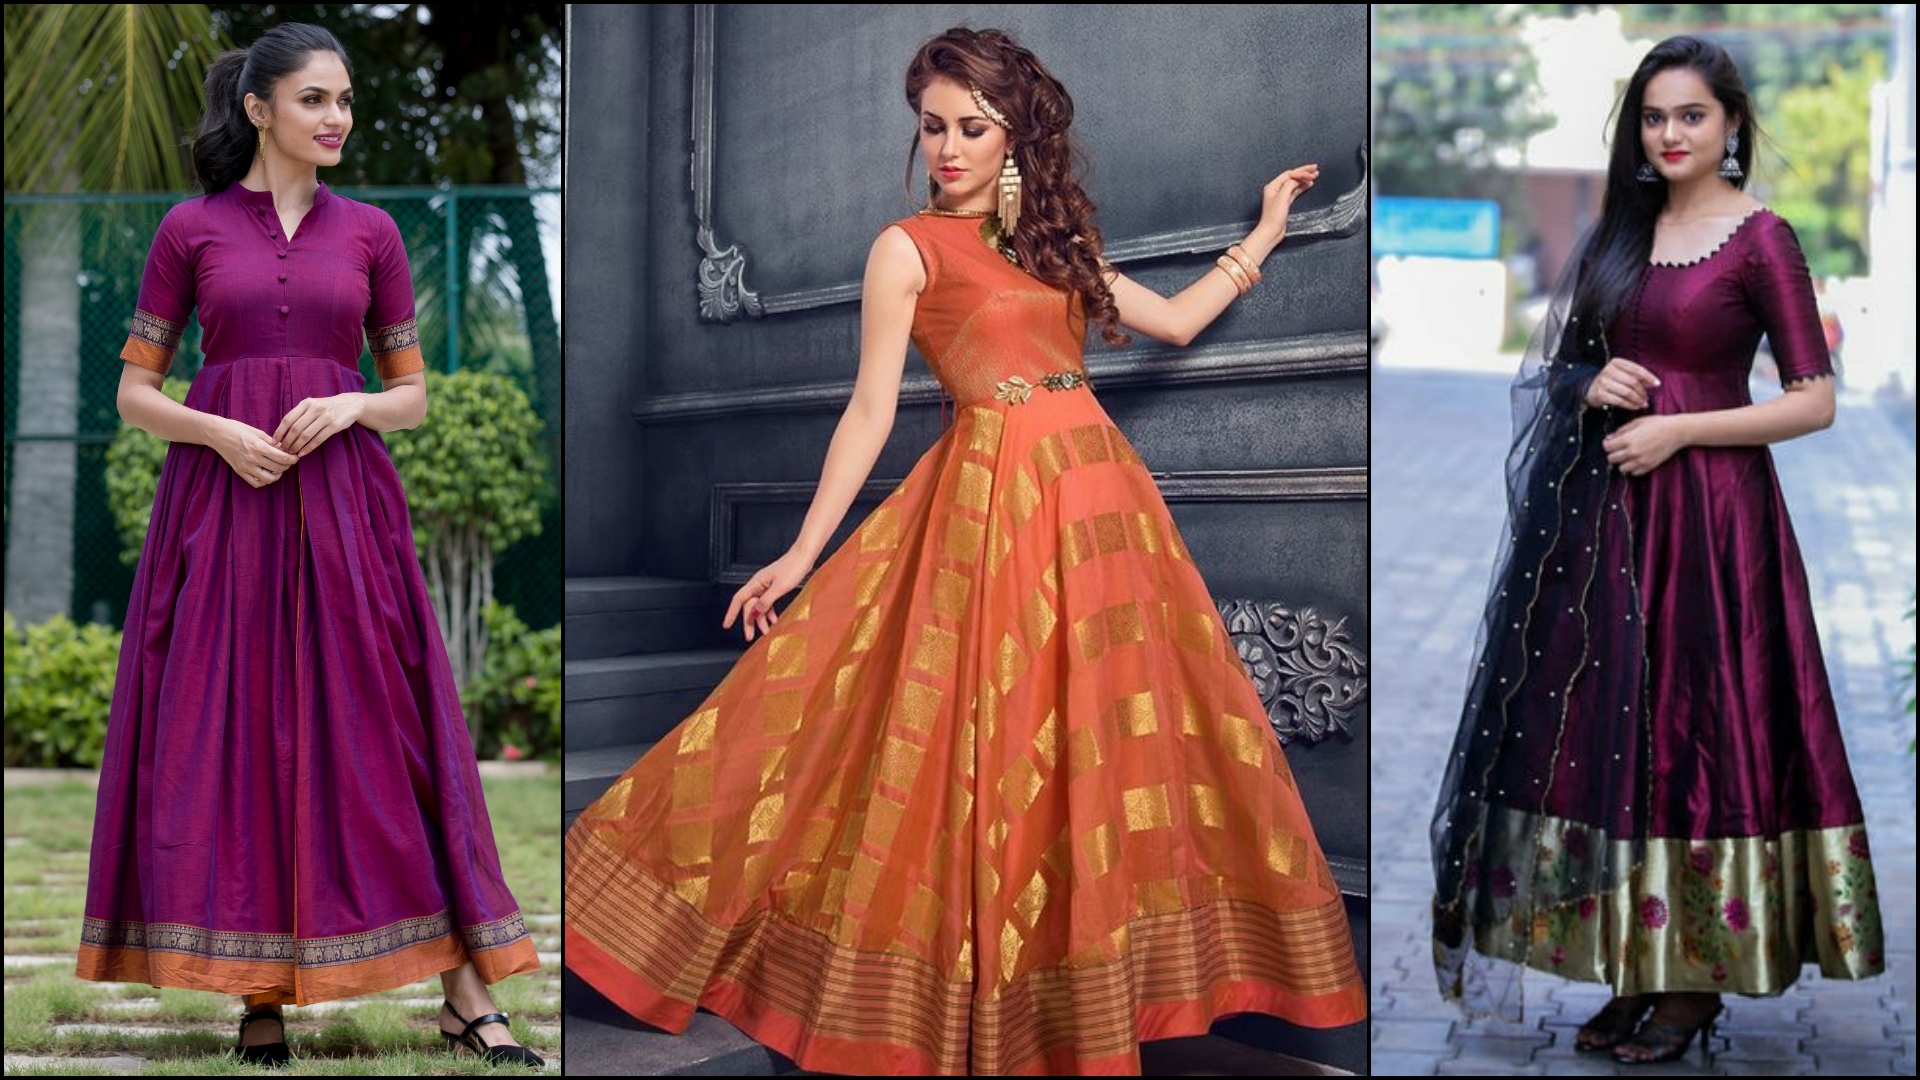 What If You Can Make an Exclusive Designer Dress by Re-Using Your Old Saree(2020)?  Create Magic by Transforming Sarees into Lehenga Using Our Craft Ideas and  Be Proud of Yourself!